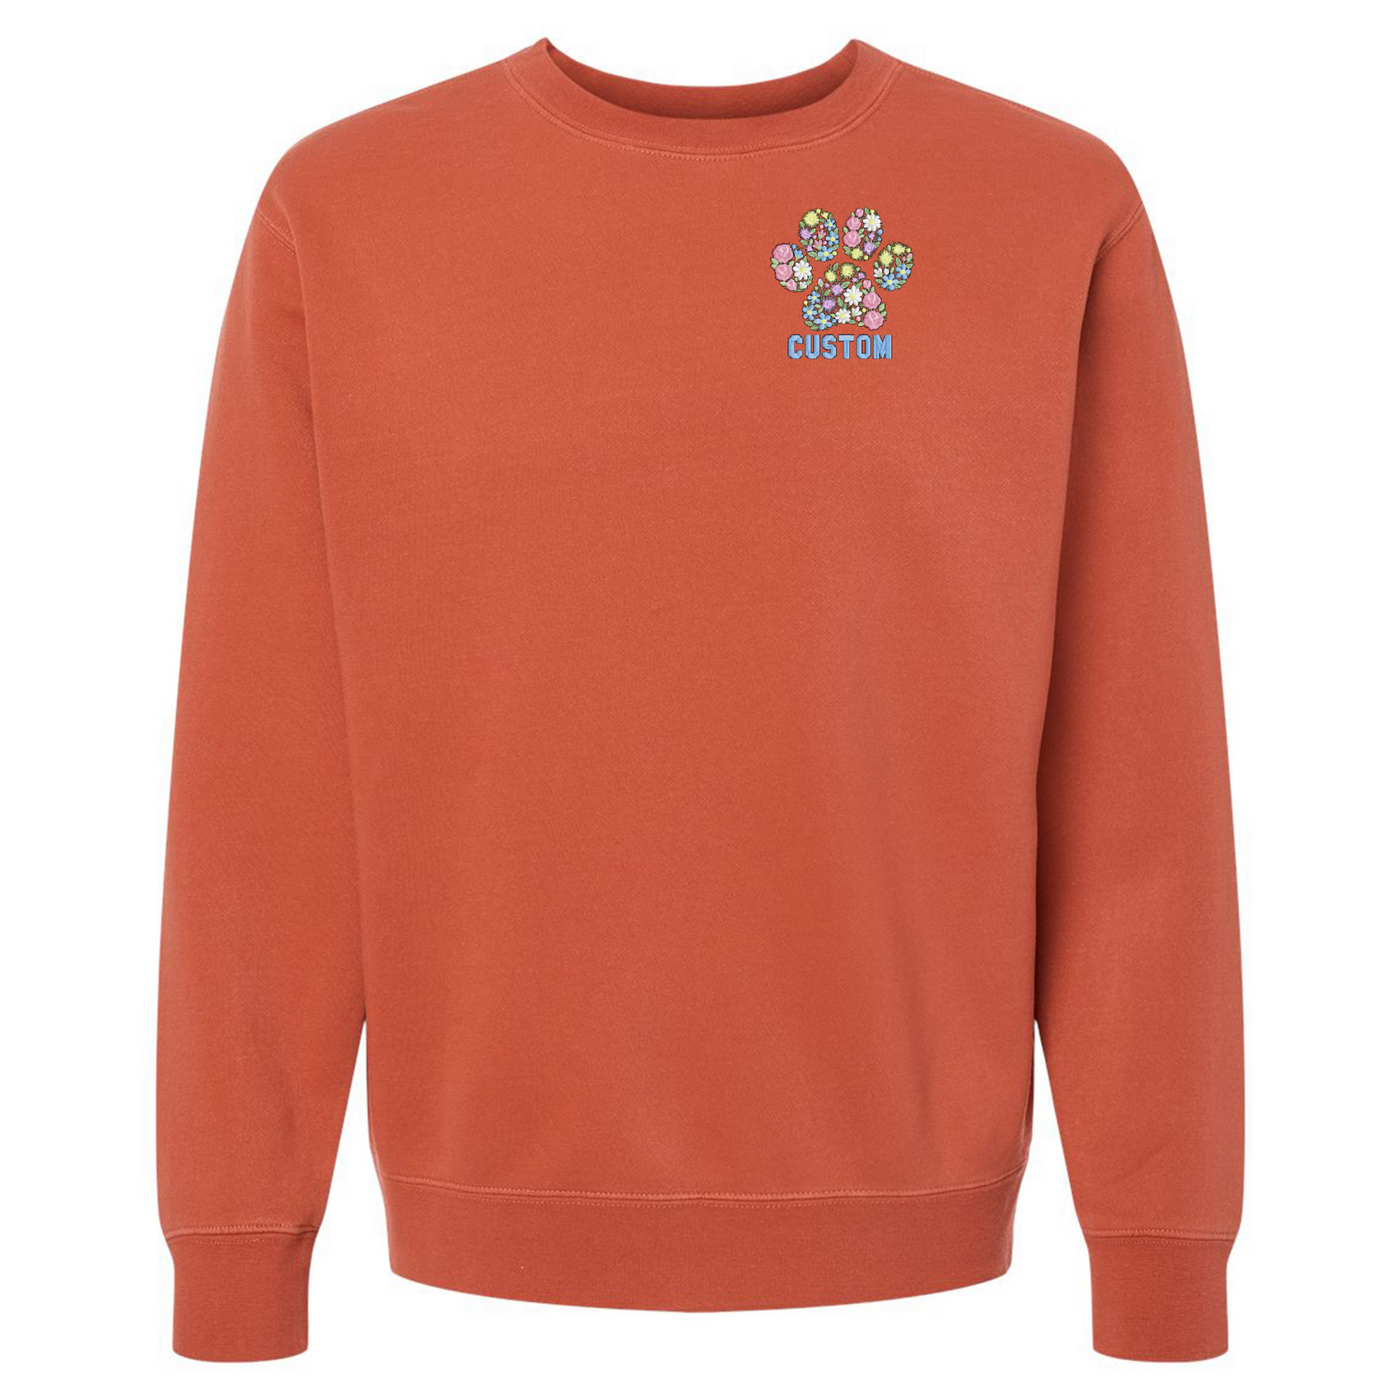 Make It Yours™ 'Floral Paw Print' Cozy Crew